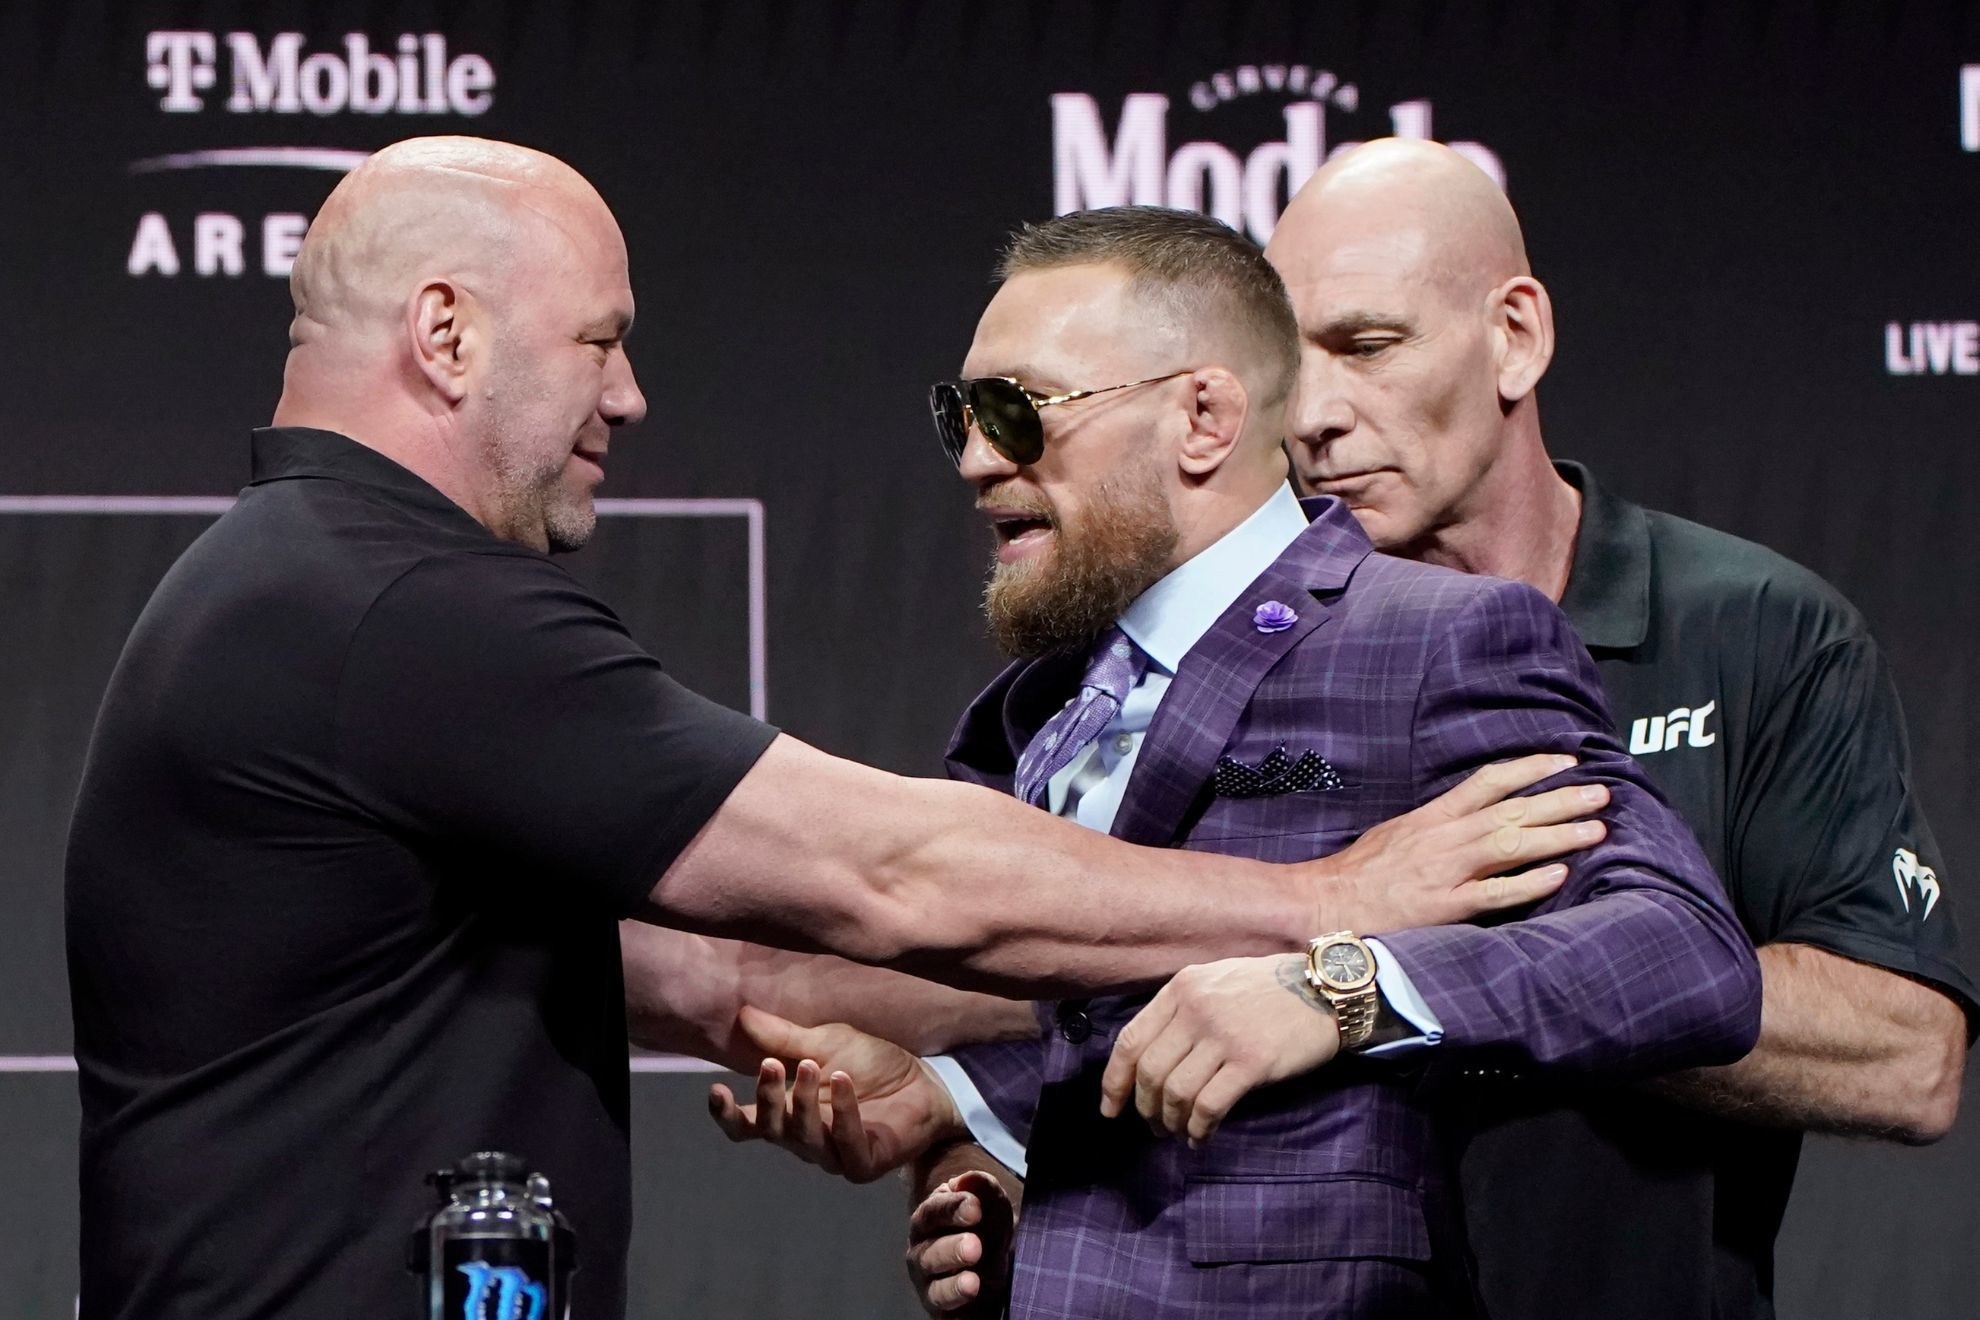 Dana White is using Conor McGregor to catapult another fighter, claims UFC legend